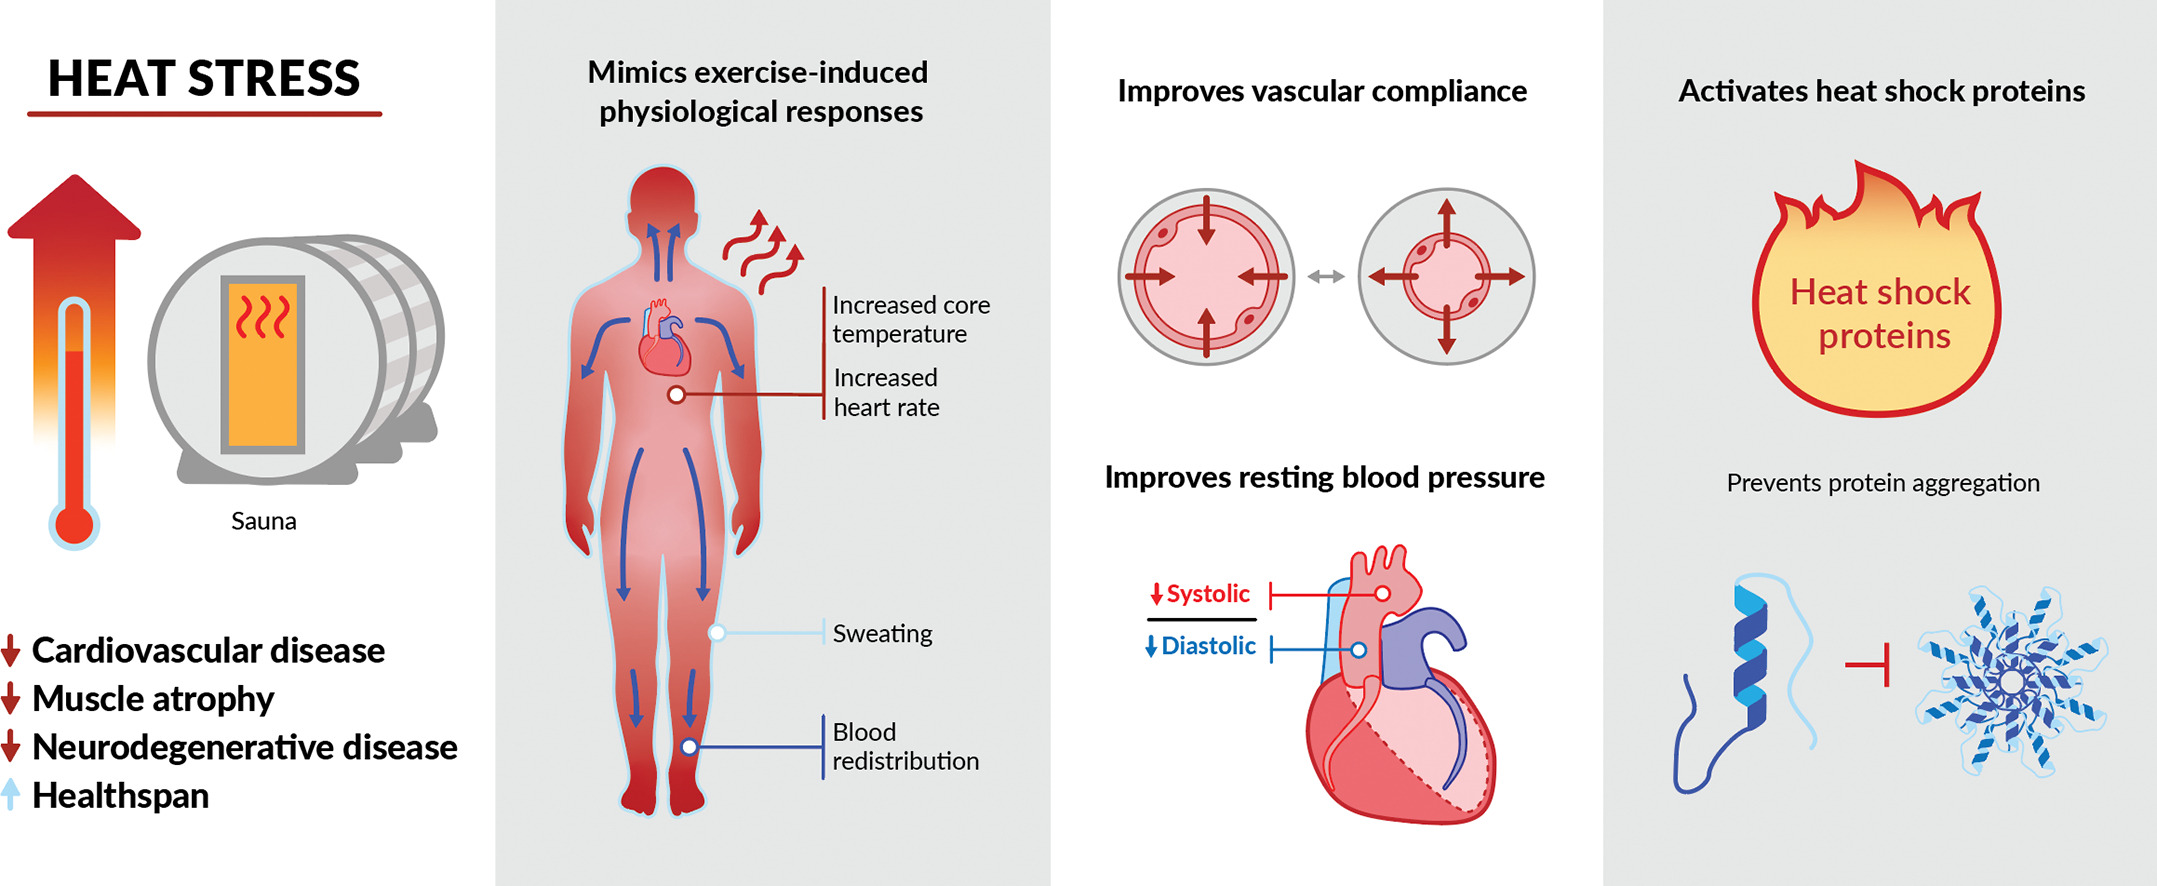 health benefits of using a sauna after workout - diagram of how heat stress aids cardiovascular health